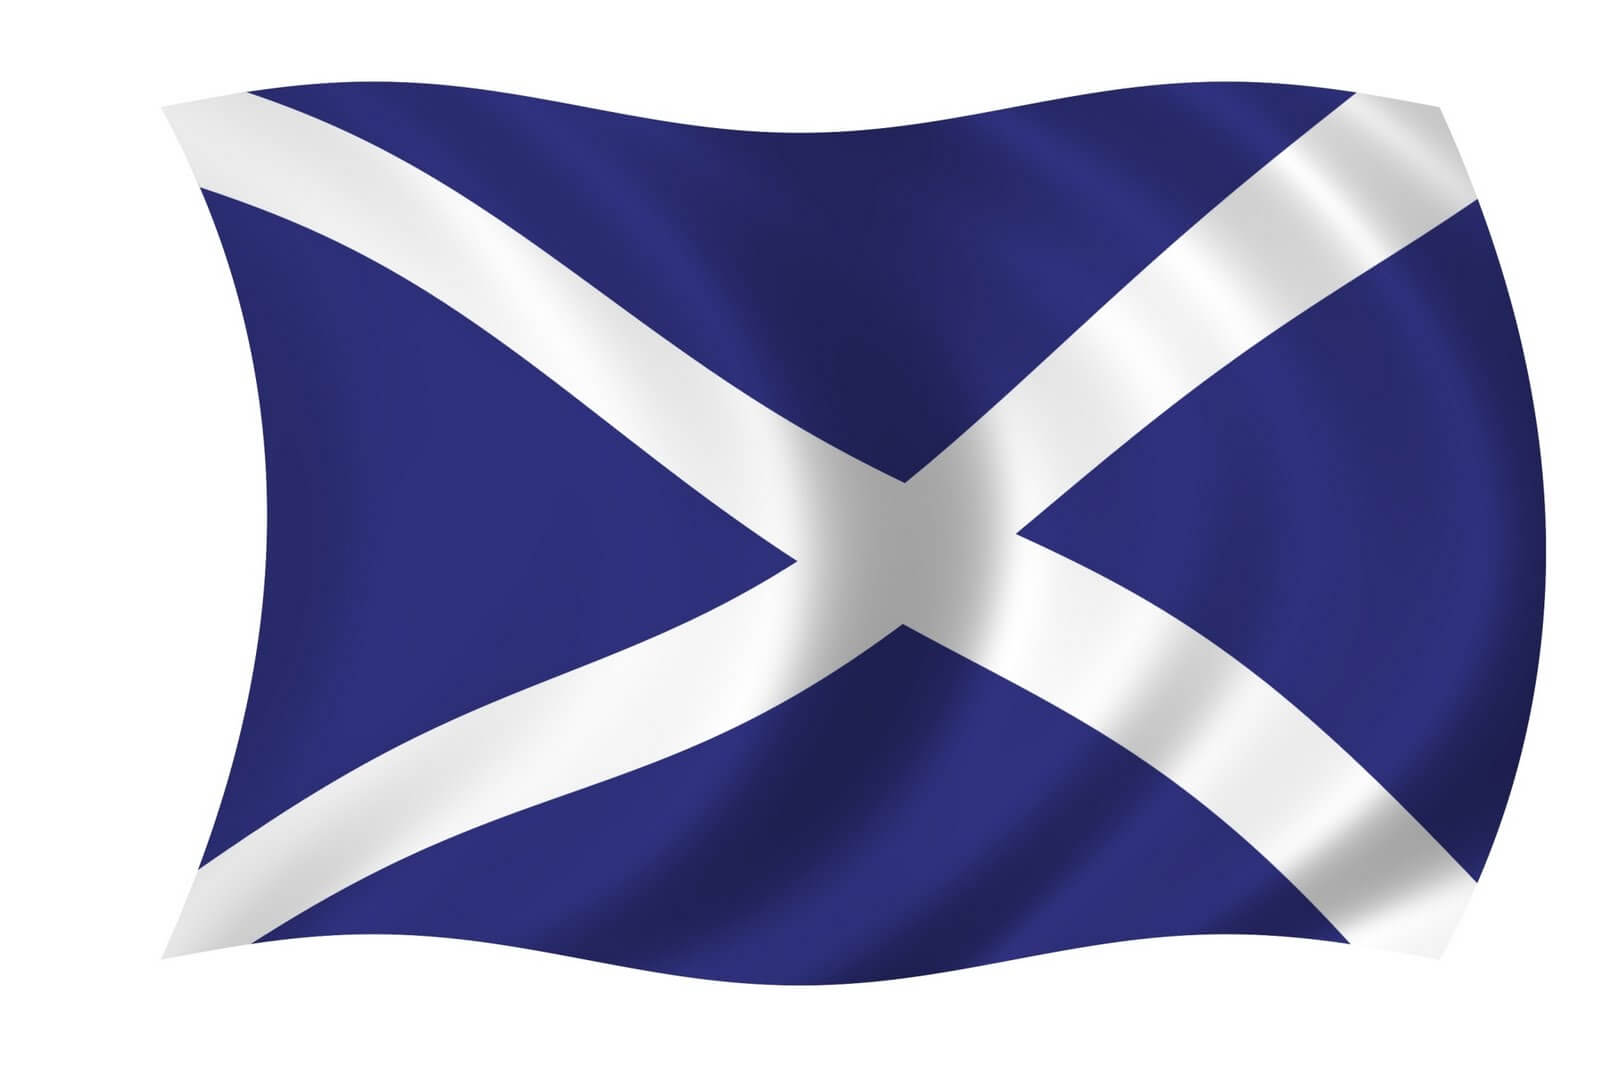 What Does The Scottish Independence Vote Have to Do with Customer Experience?